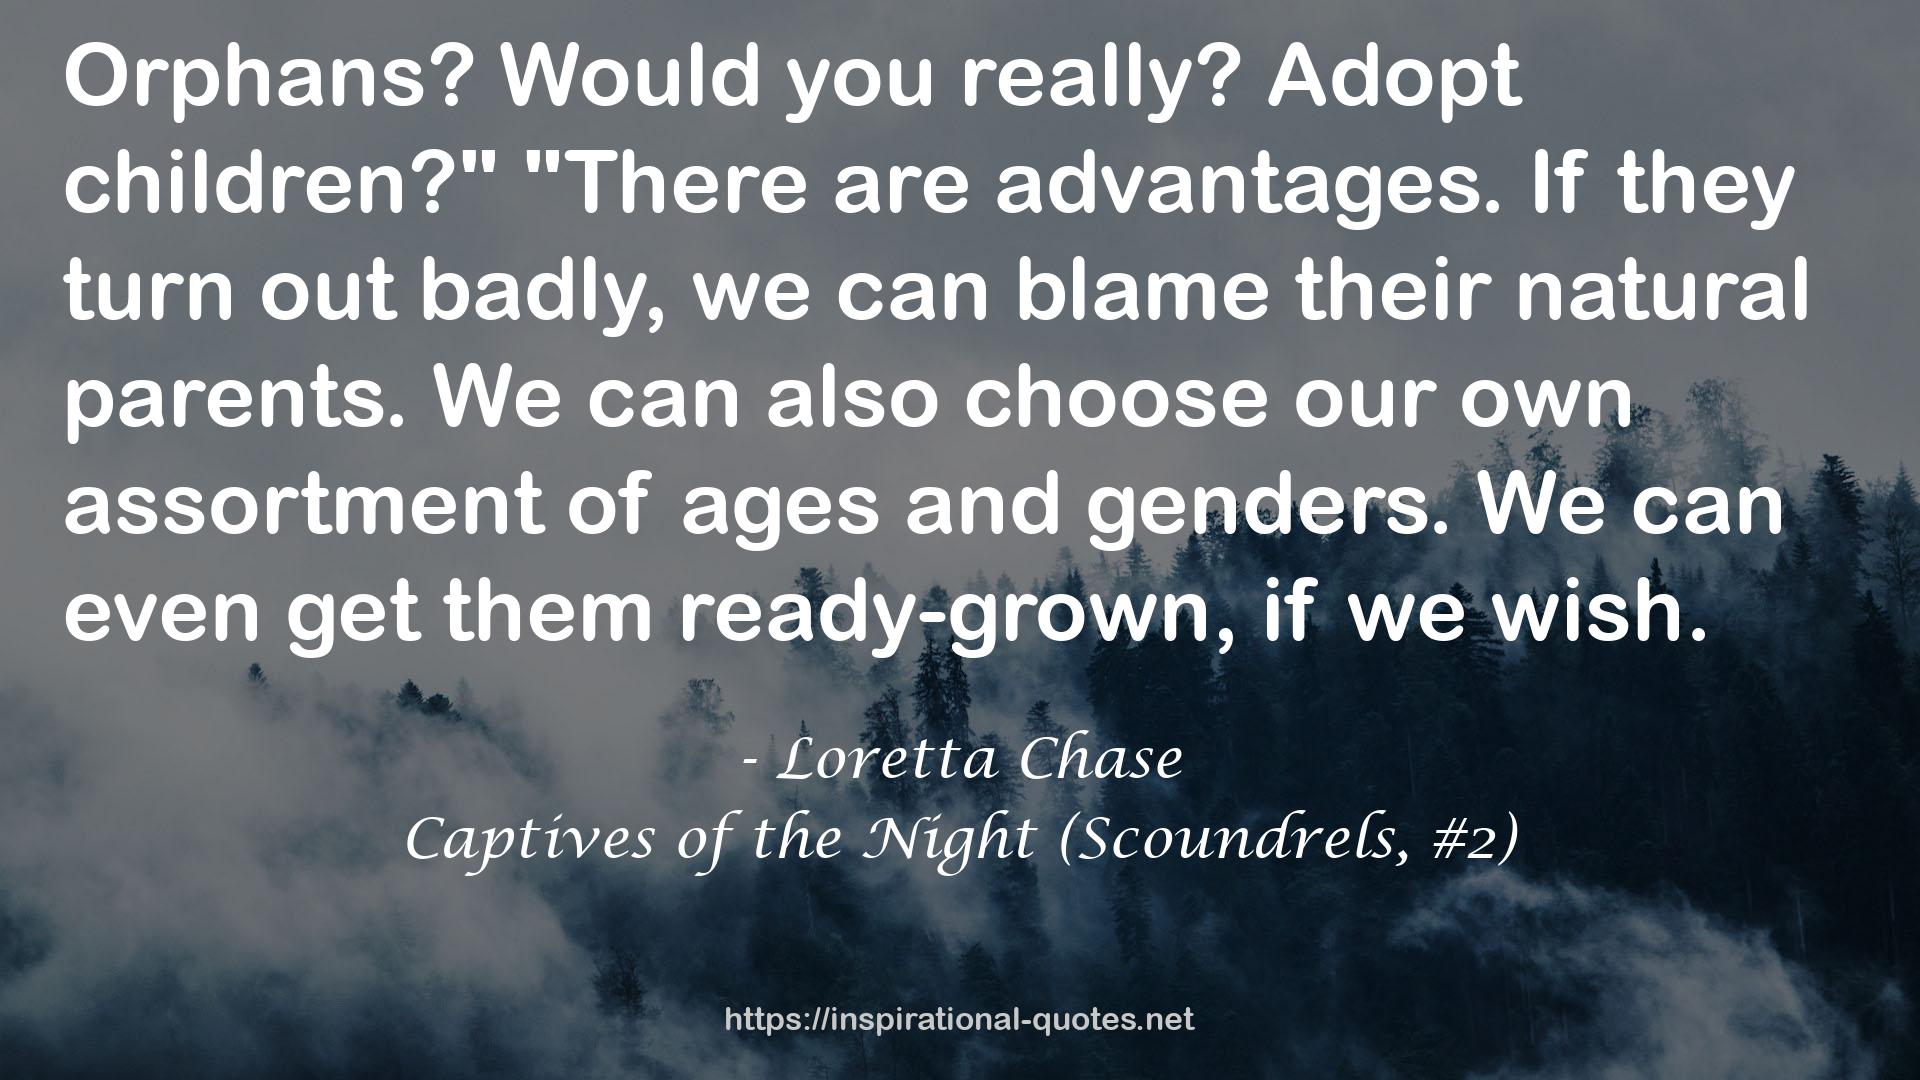 Captives of the Night (Scoundrels, #2) QUOTES